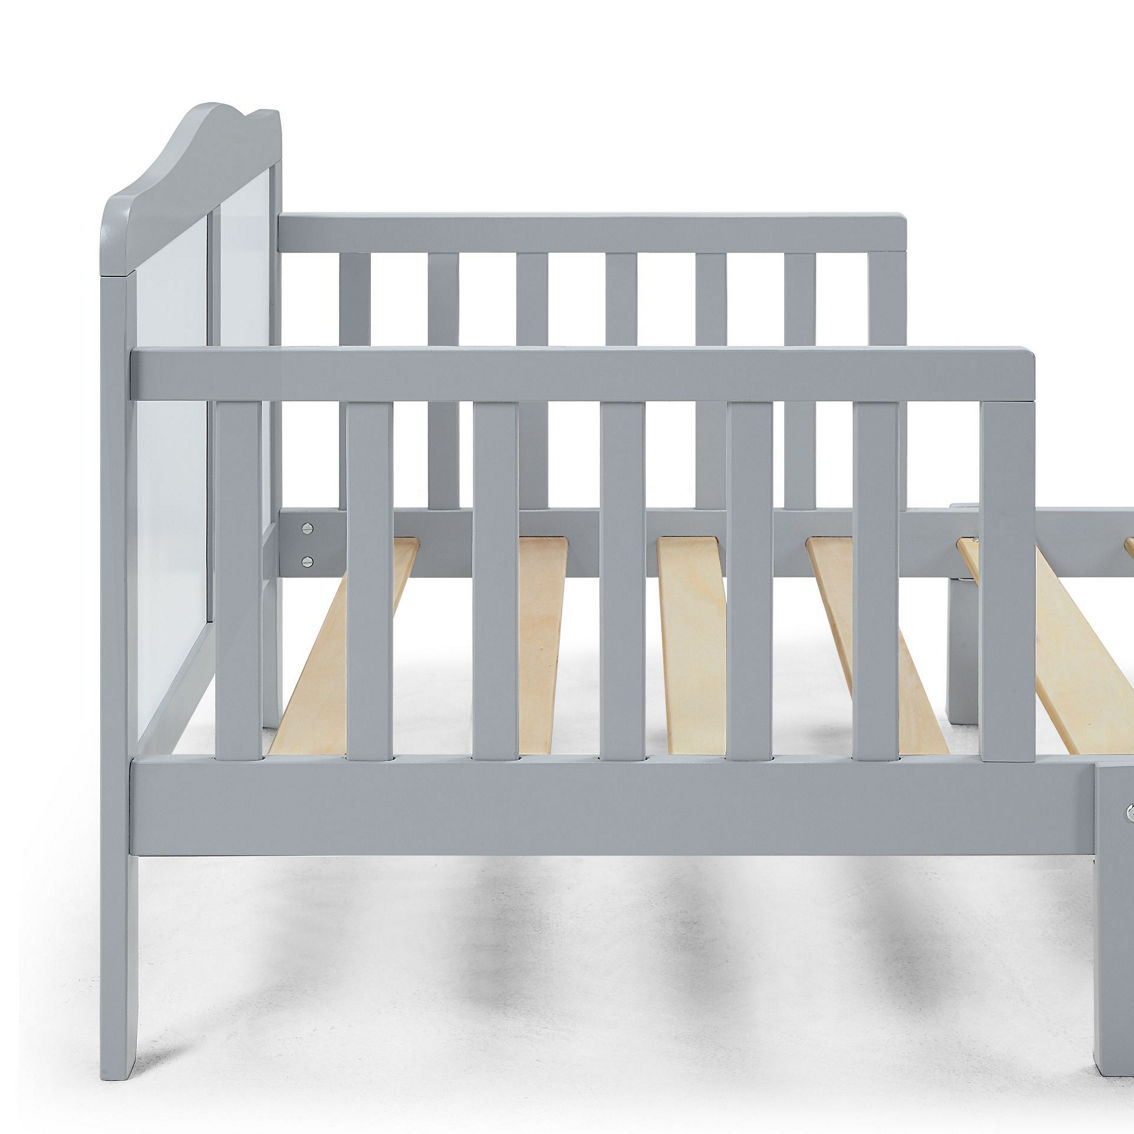 Olive & Opie Birdie Toddler Bed Light Gray/White - Image 4 of 5